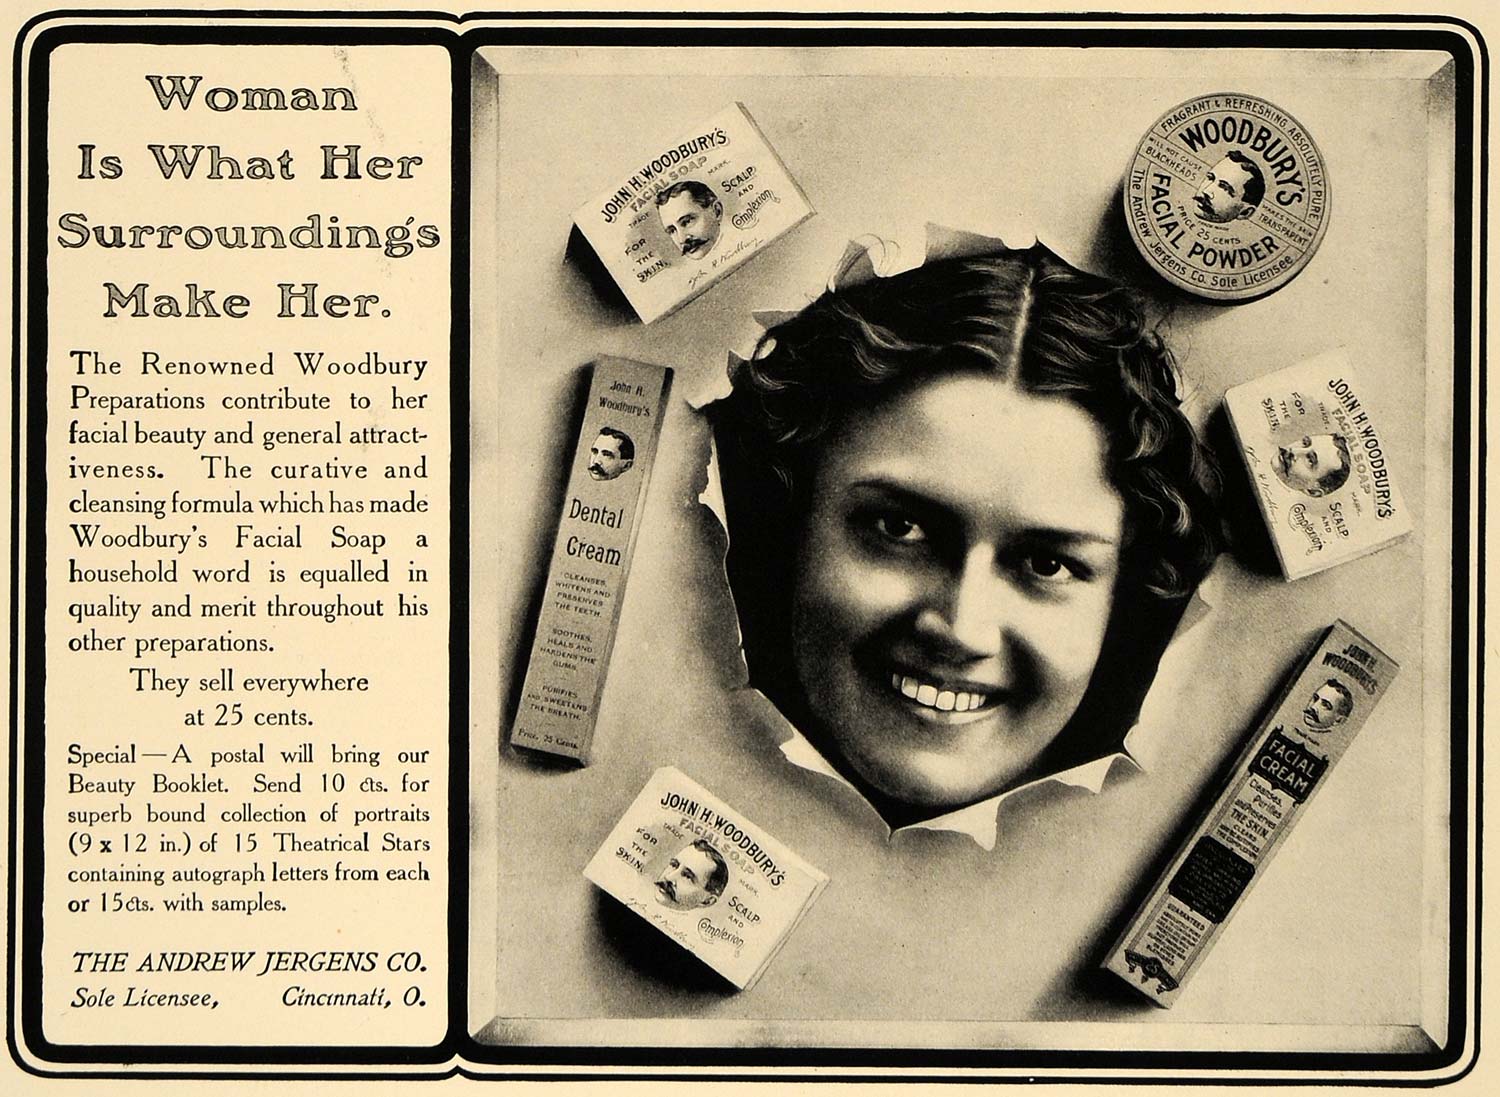 1905 Ad Andrew Jergens Woodbury Facial Soap Products - ORIGINAL ADVERTISING CL7